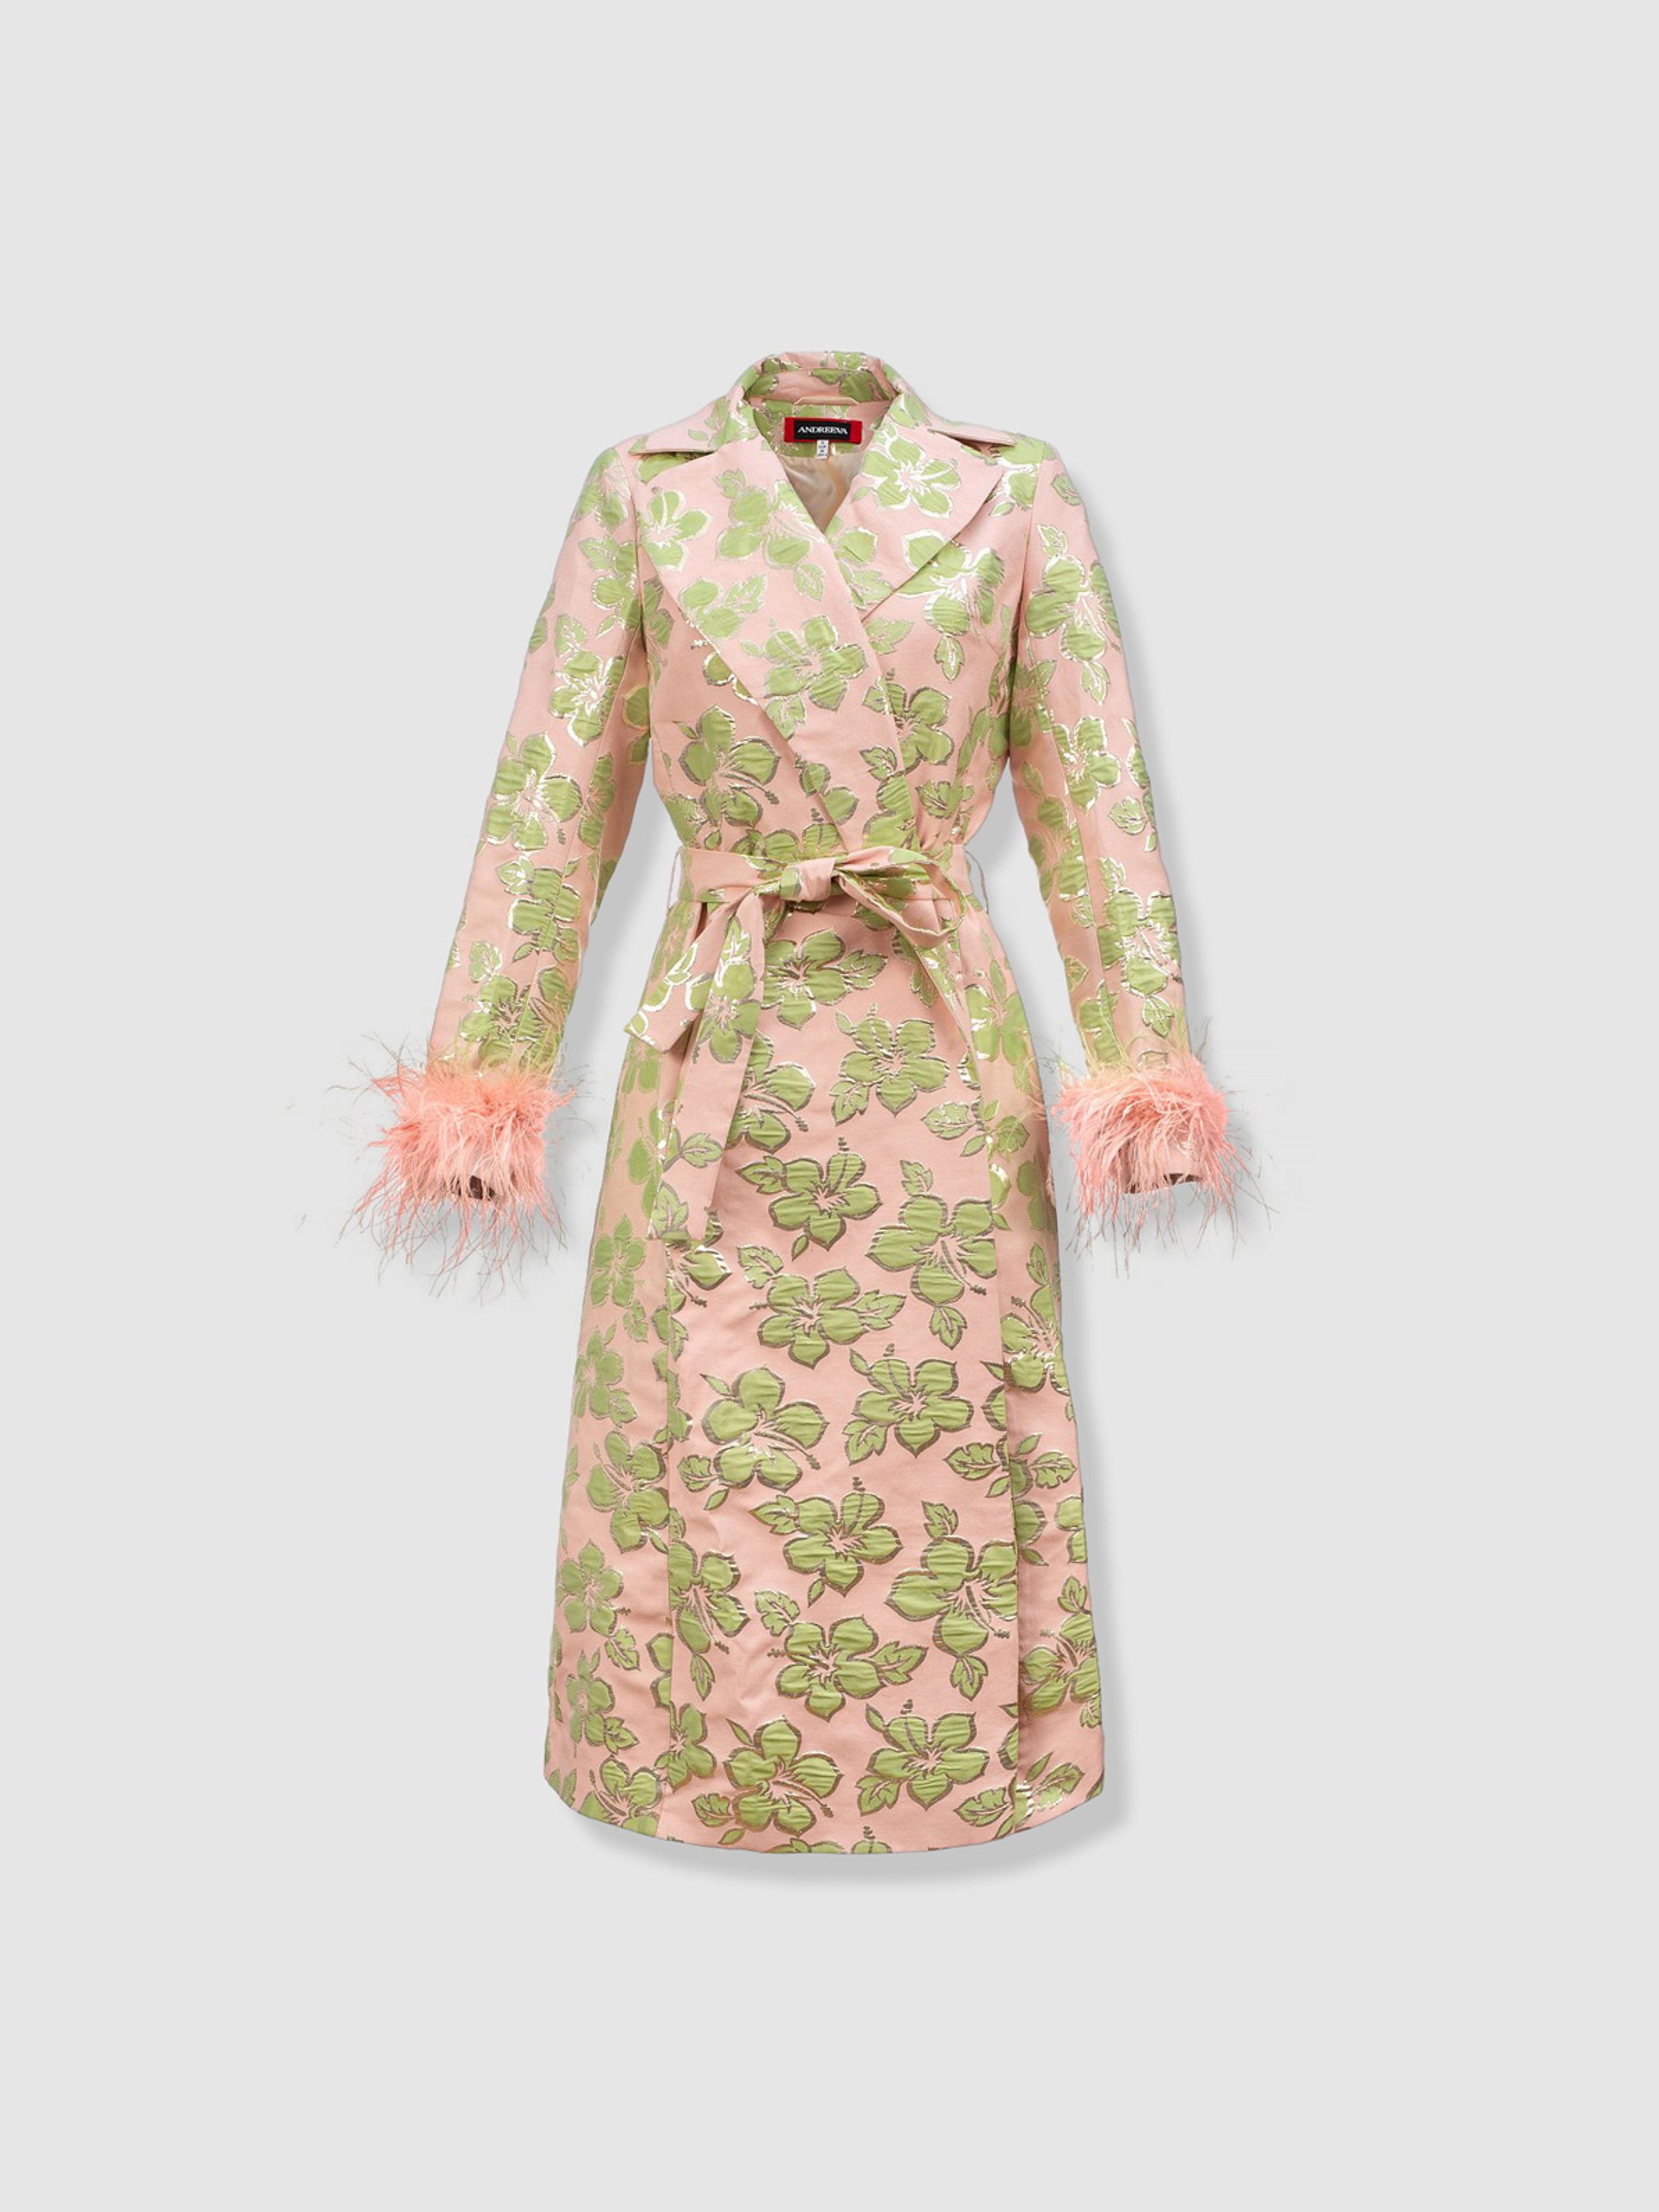 ANDREEVA ANDREEVA PINK JACQUARD COAT №19 WITH DETACHABLE FEATHER CUFFS